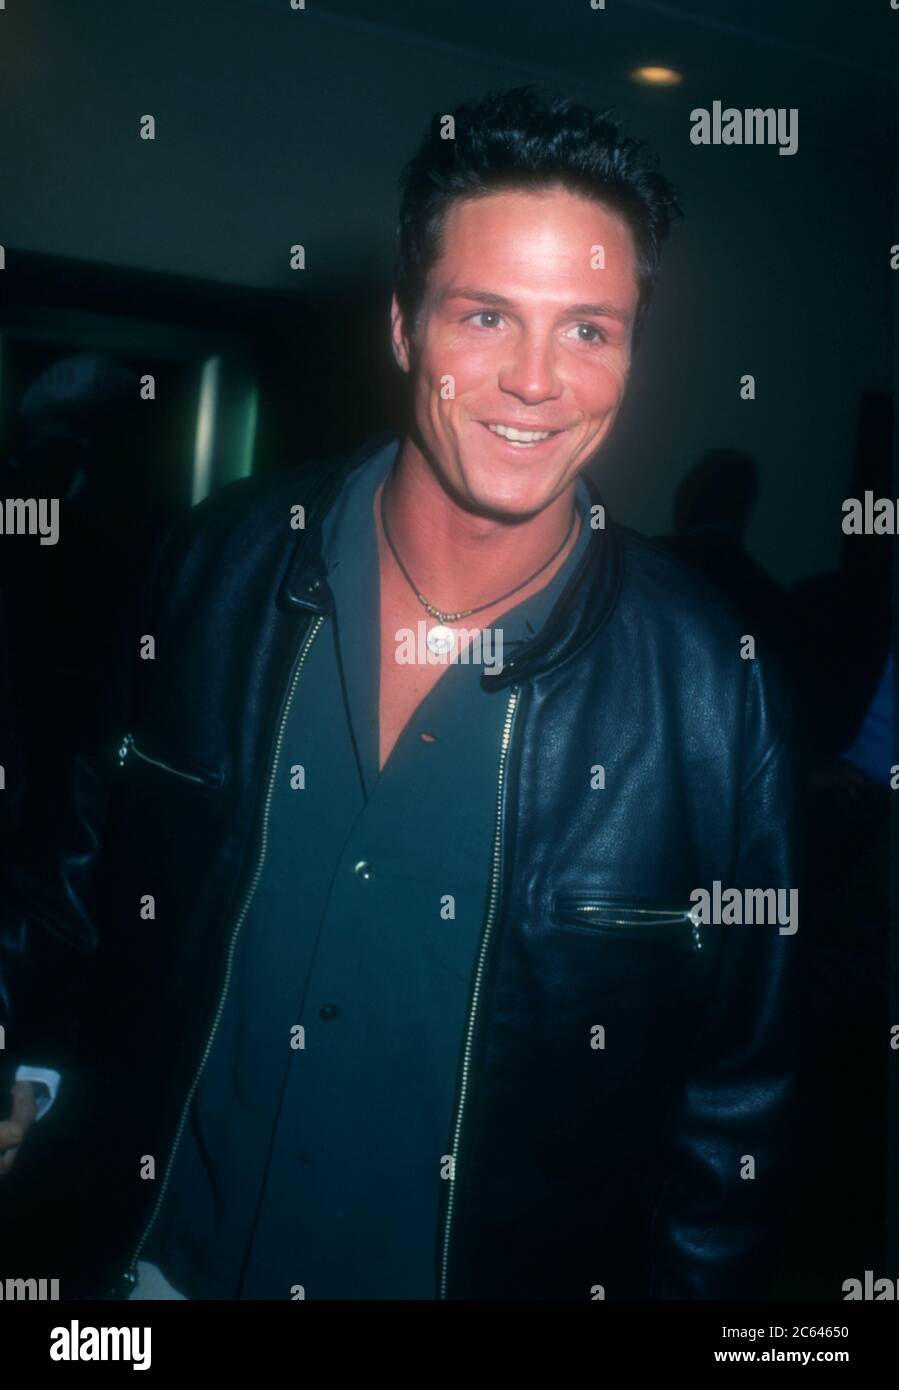 Westwood, California, USA 13th December 1995 Actor Jason Wiles attends Universal Pictures' '12 Monkeys' Premiere on December 13, 1995 at Mann Bruin Theatre in Westwood, California, USA. Photo by Barry King/Alamy Stock Photo Stock Photo